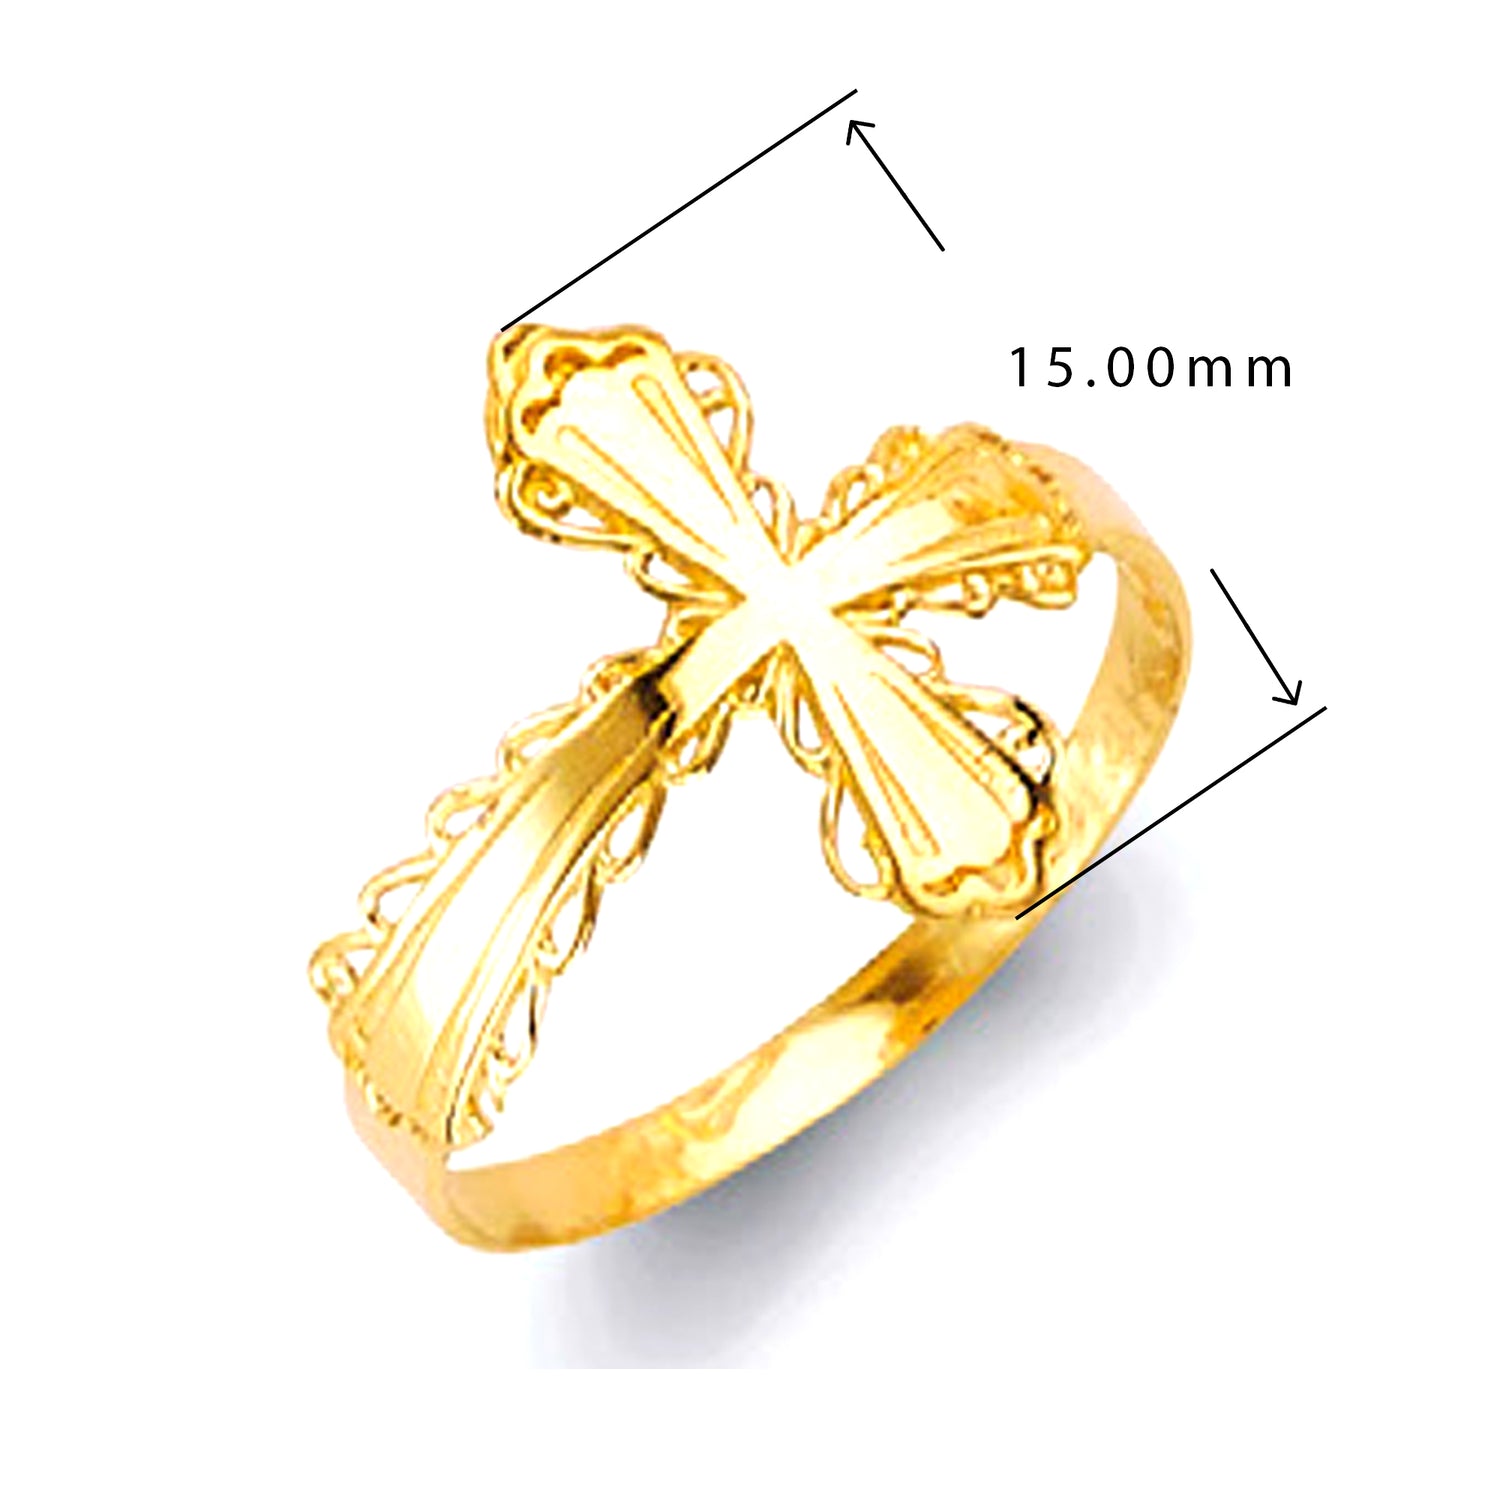 Surreal Bow Knot Ring in Solid Gold with Measurement 